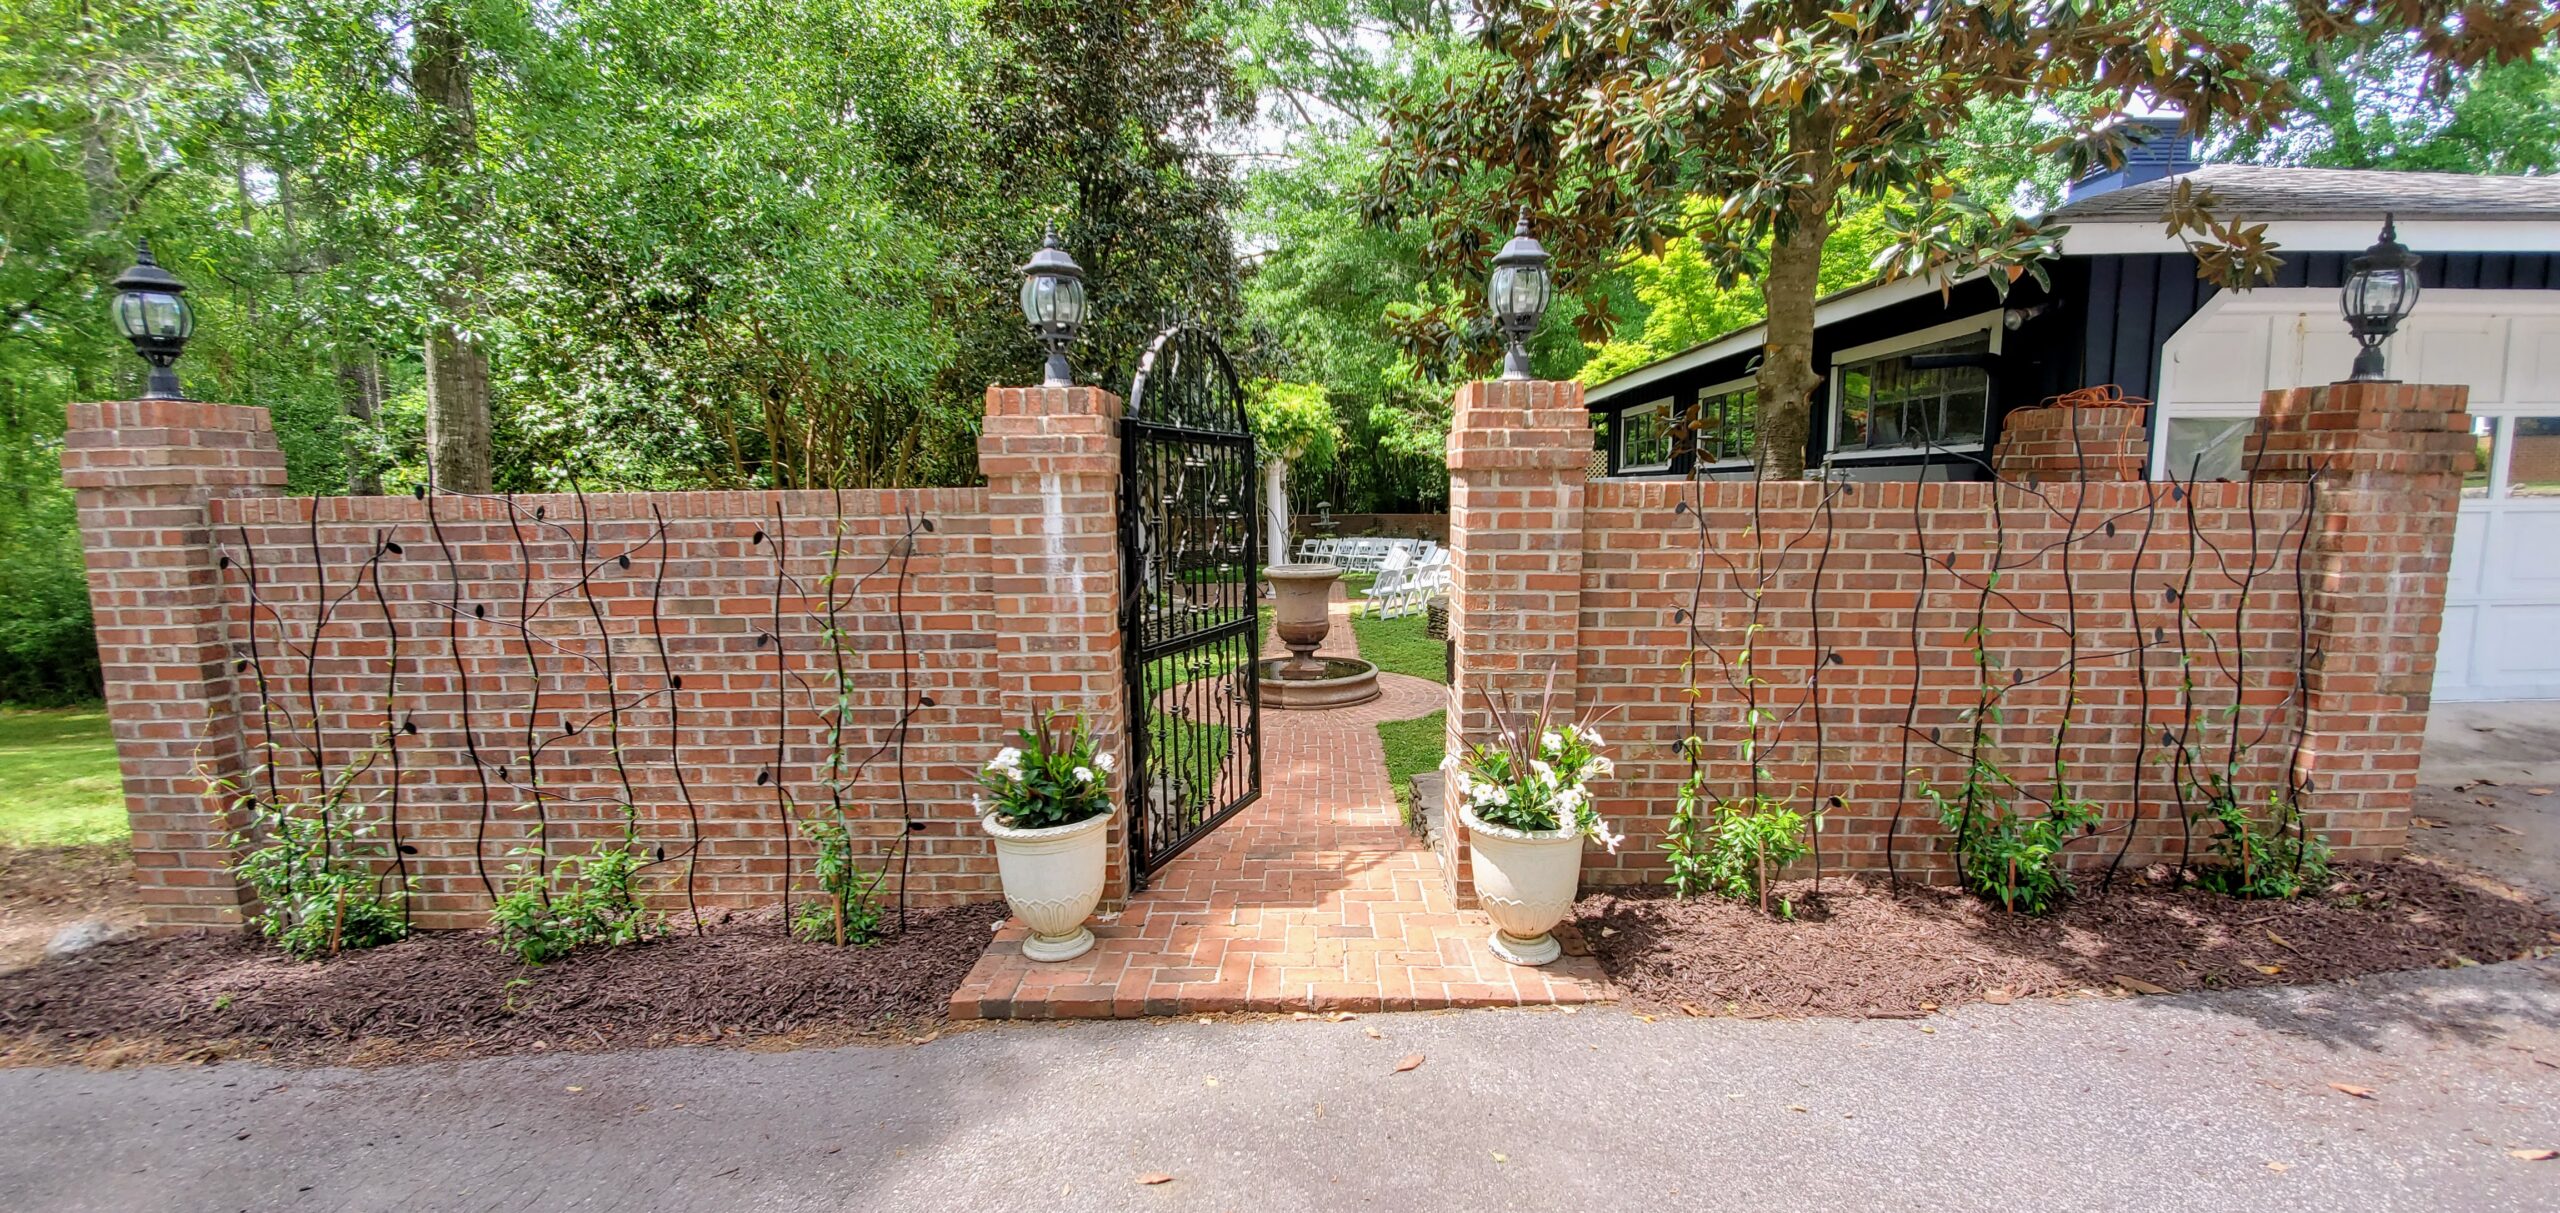 Gate at the House